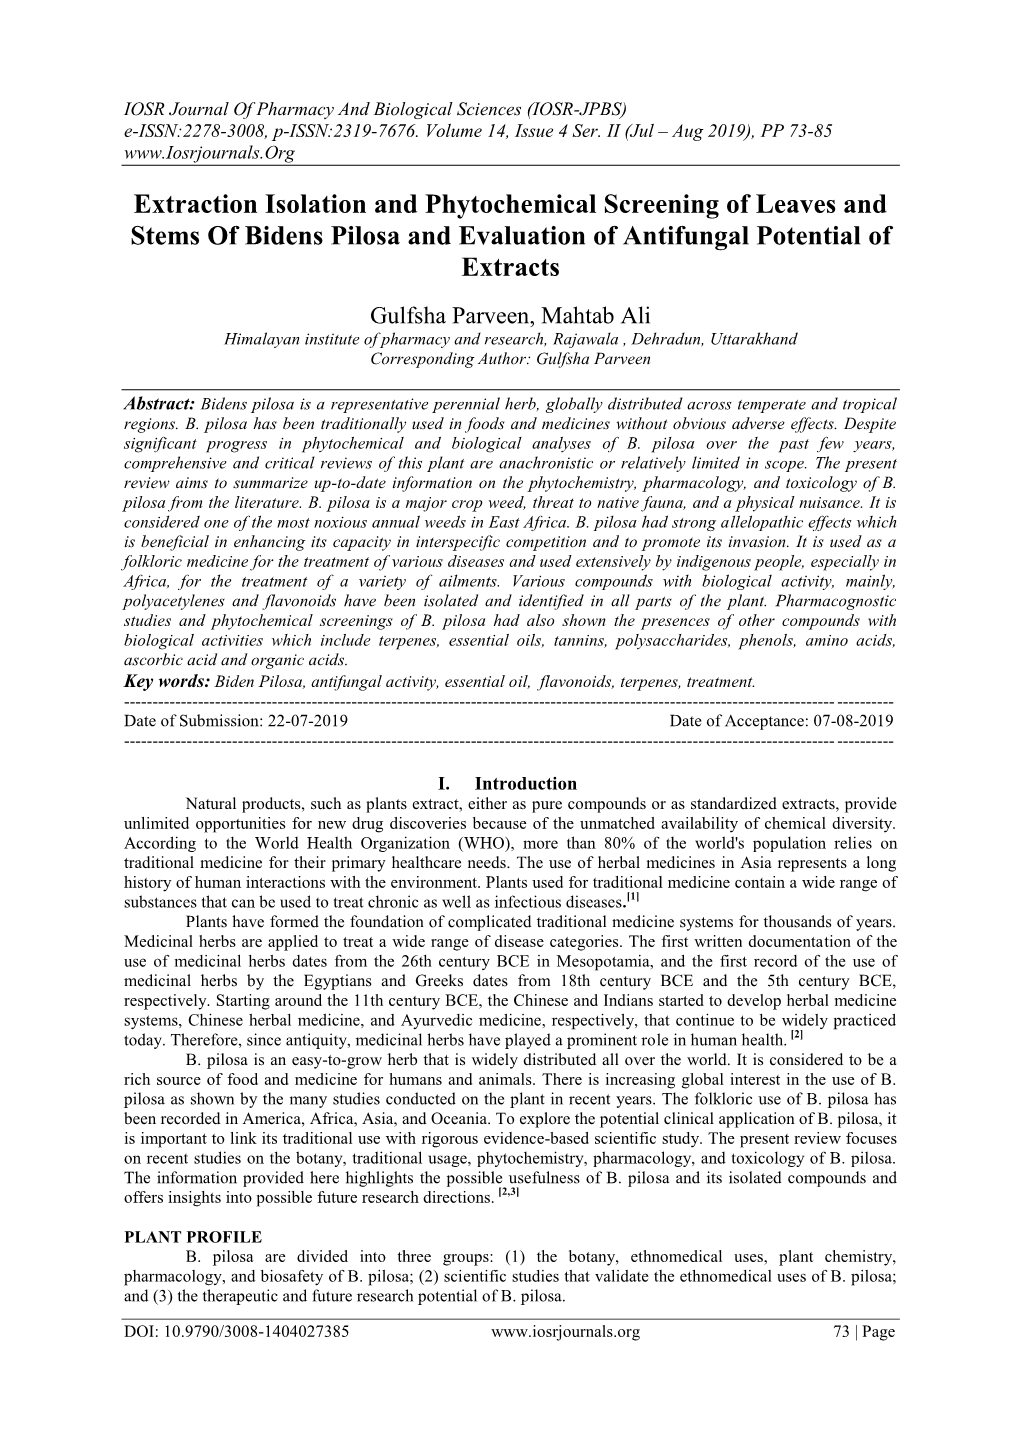 Extraction Isolation and Phytochemical Screening of Leaves and Stems of Bidens Pilosa and Evaluation of Antifungal Potential of Extracts